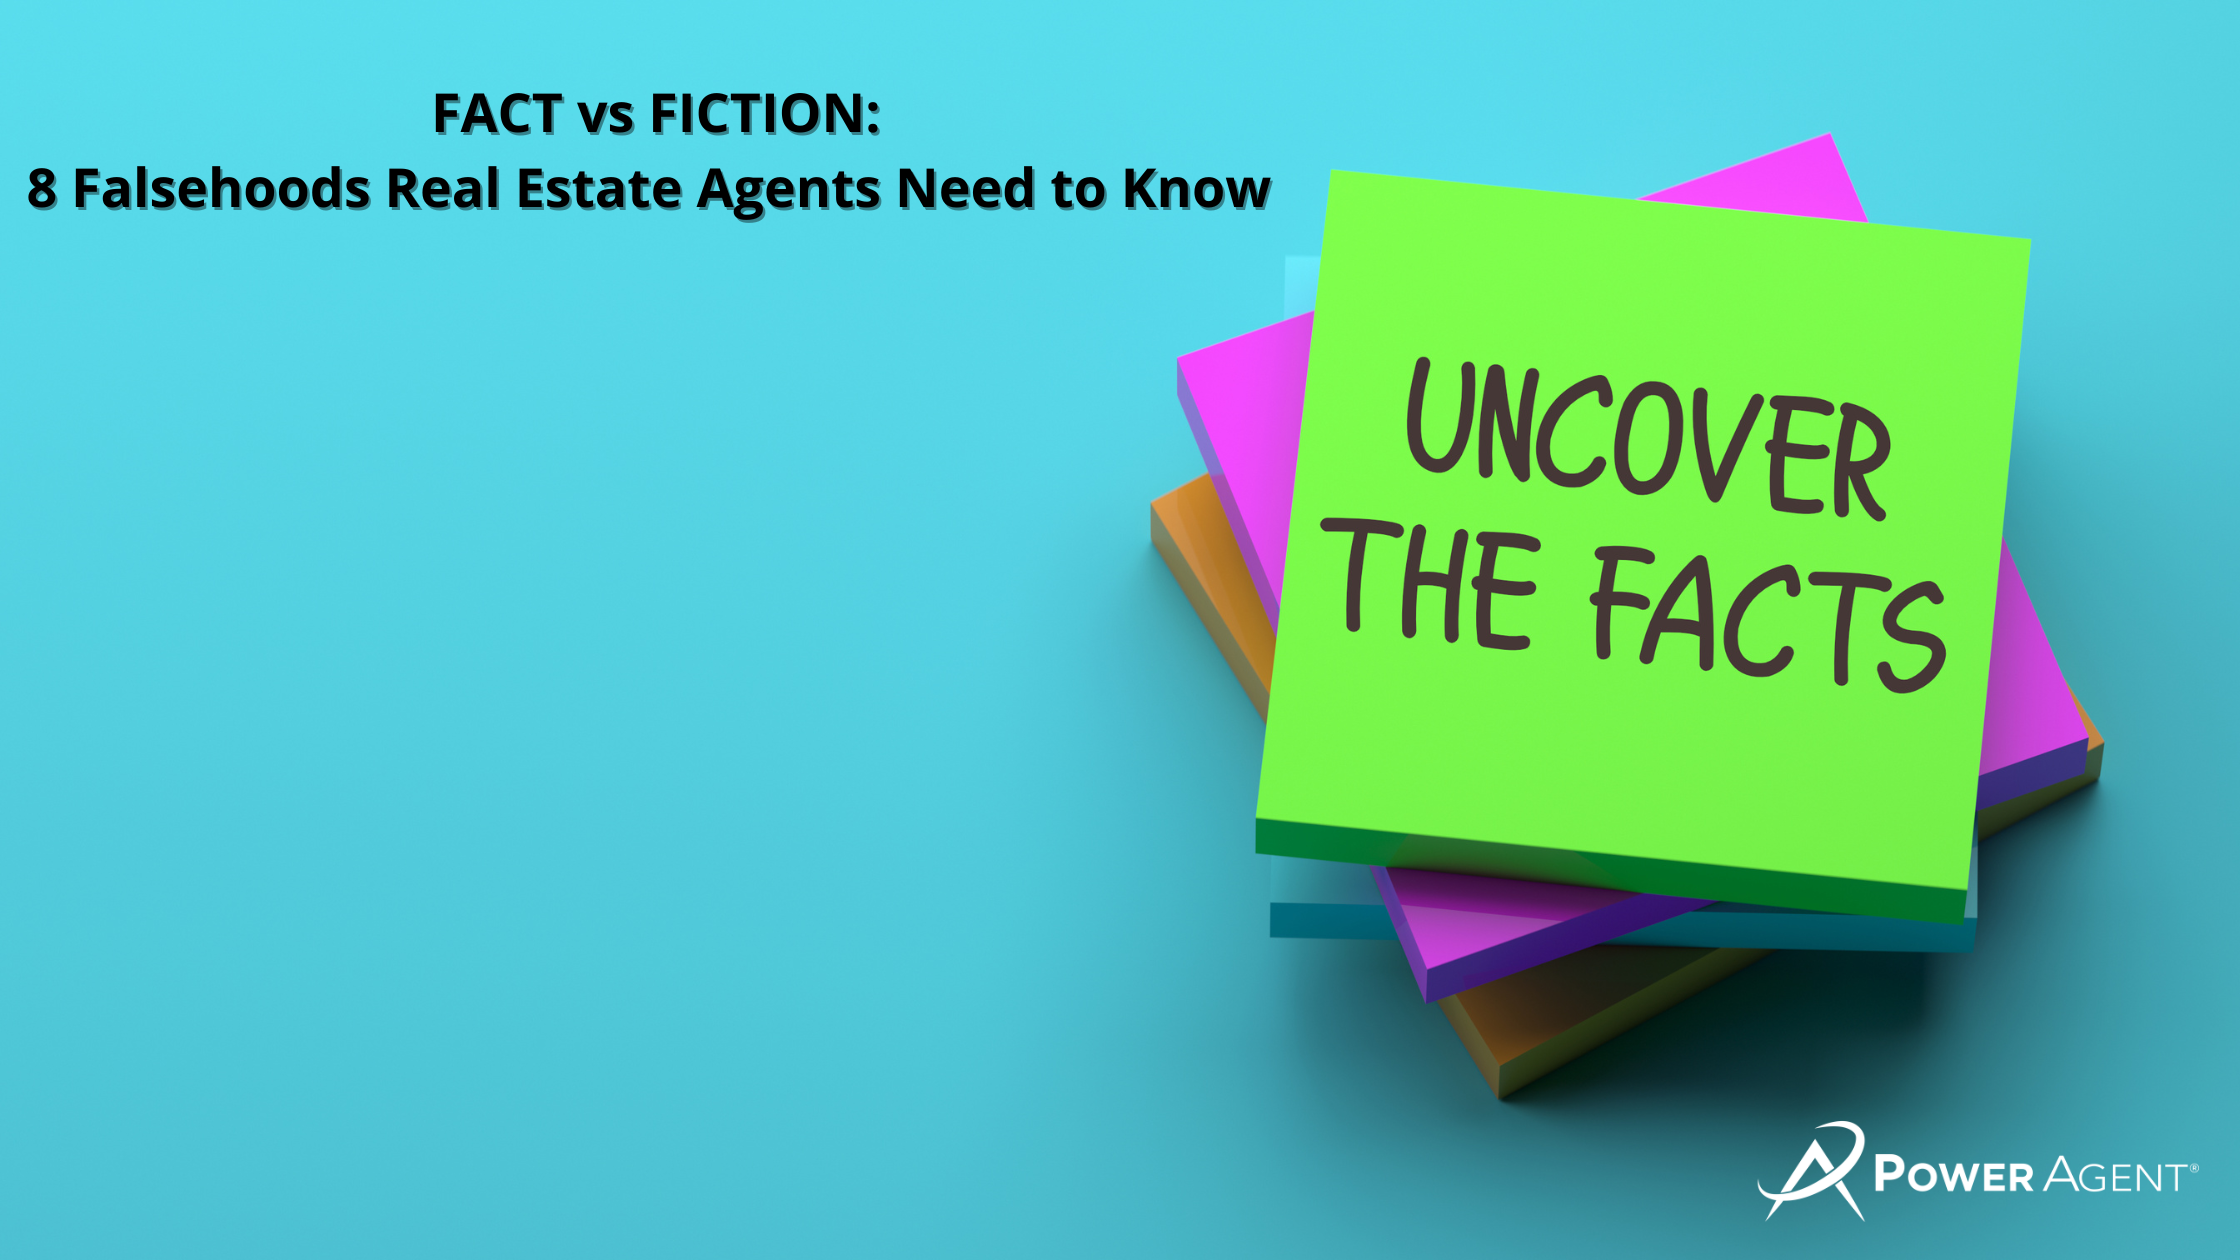 FACT vs FICTION: 8 Falsehoods Real Estate Agents Need to Know  